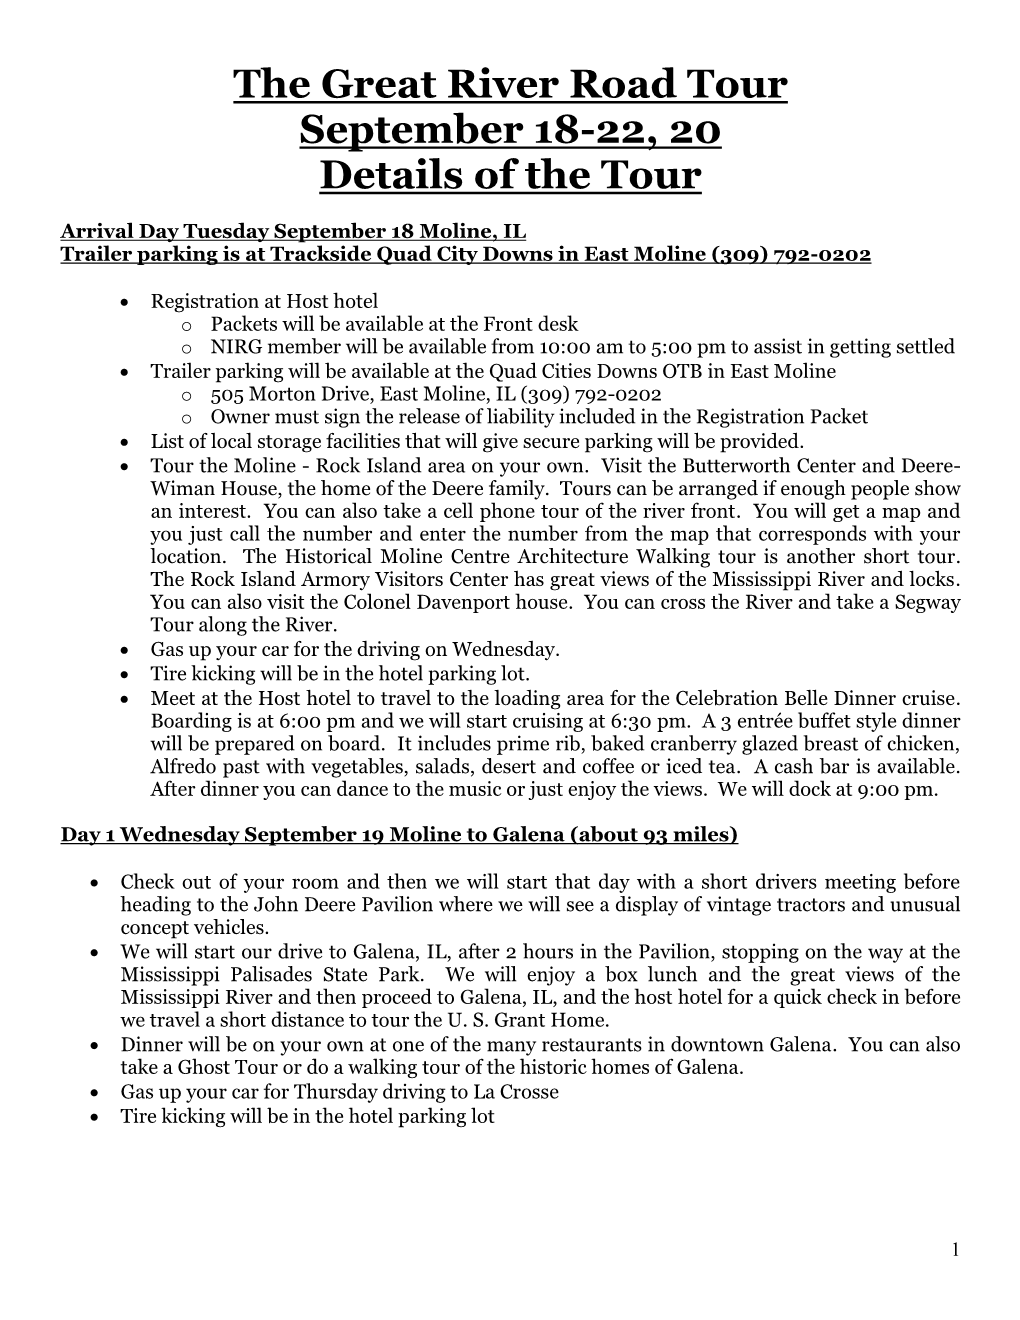 The Great River Road Tour September 18-22, 20 Details of the Tour